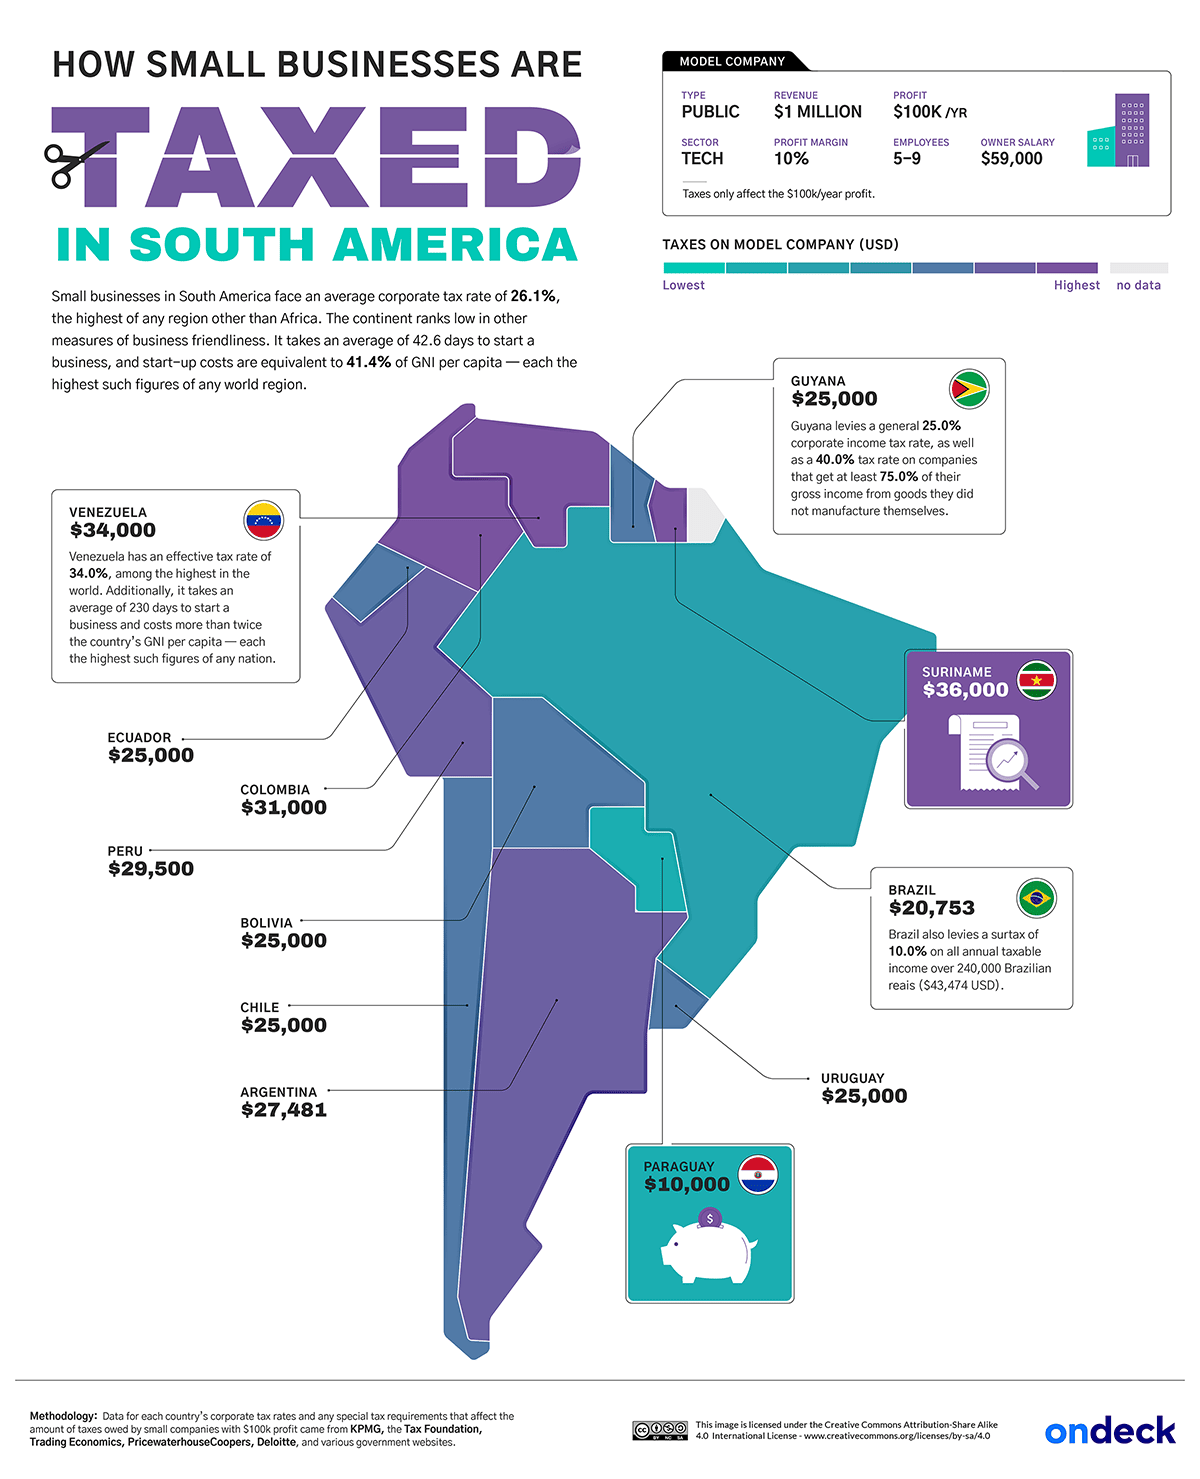 How Small Businesses are Taxed South America